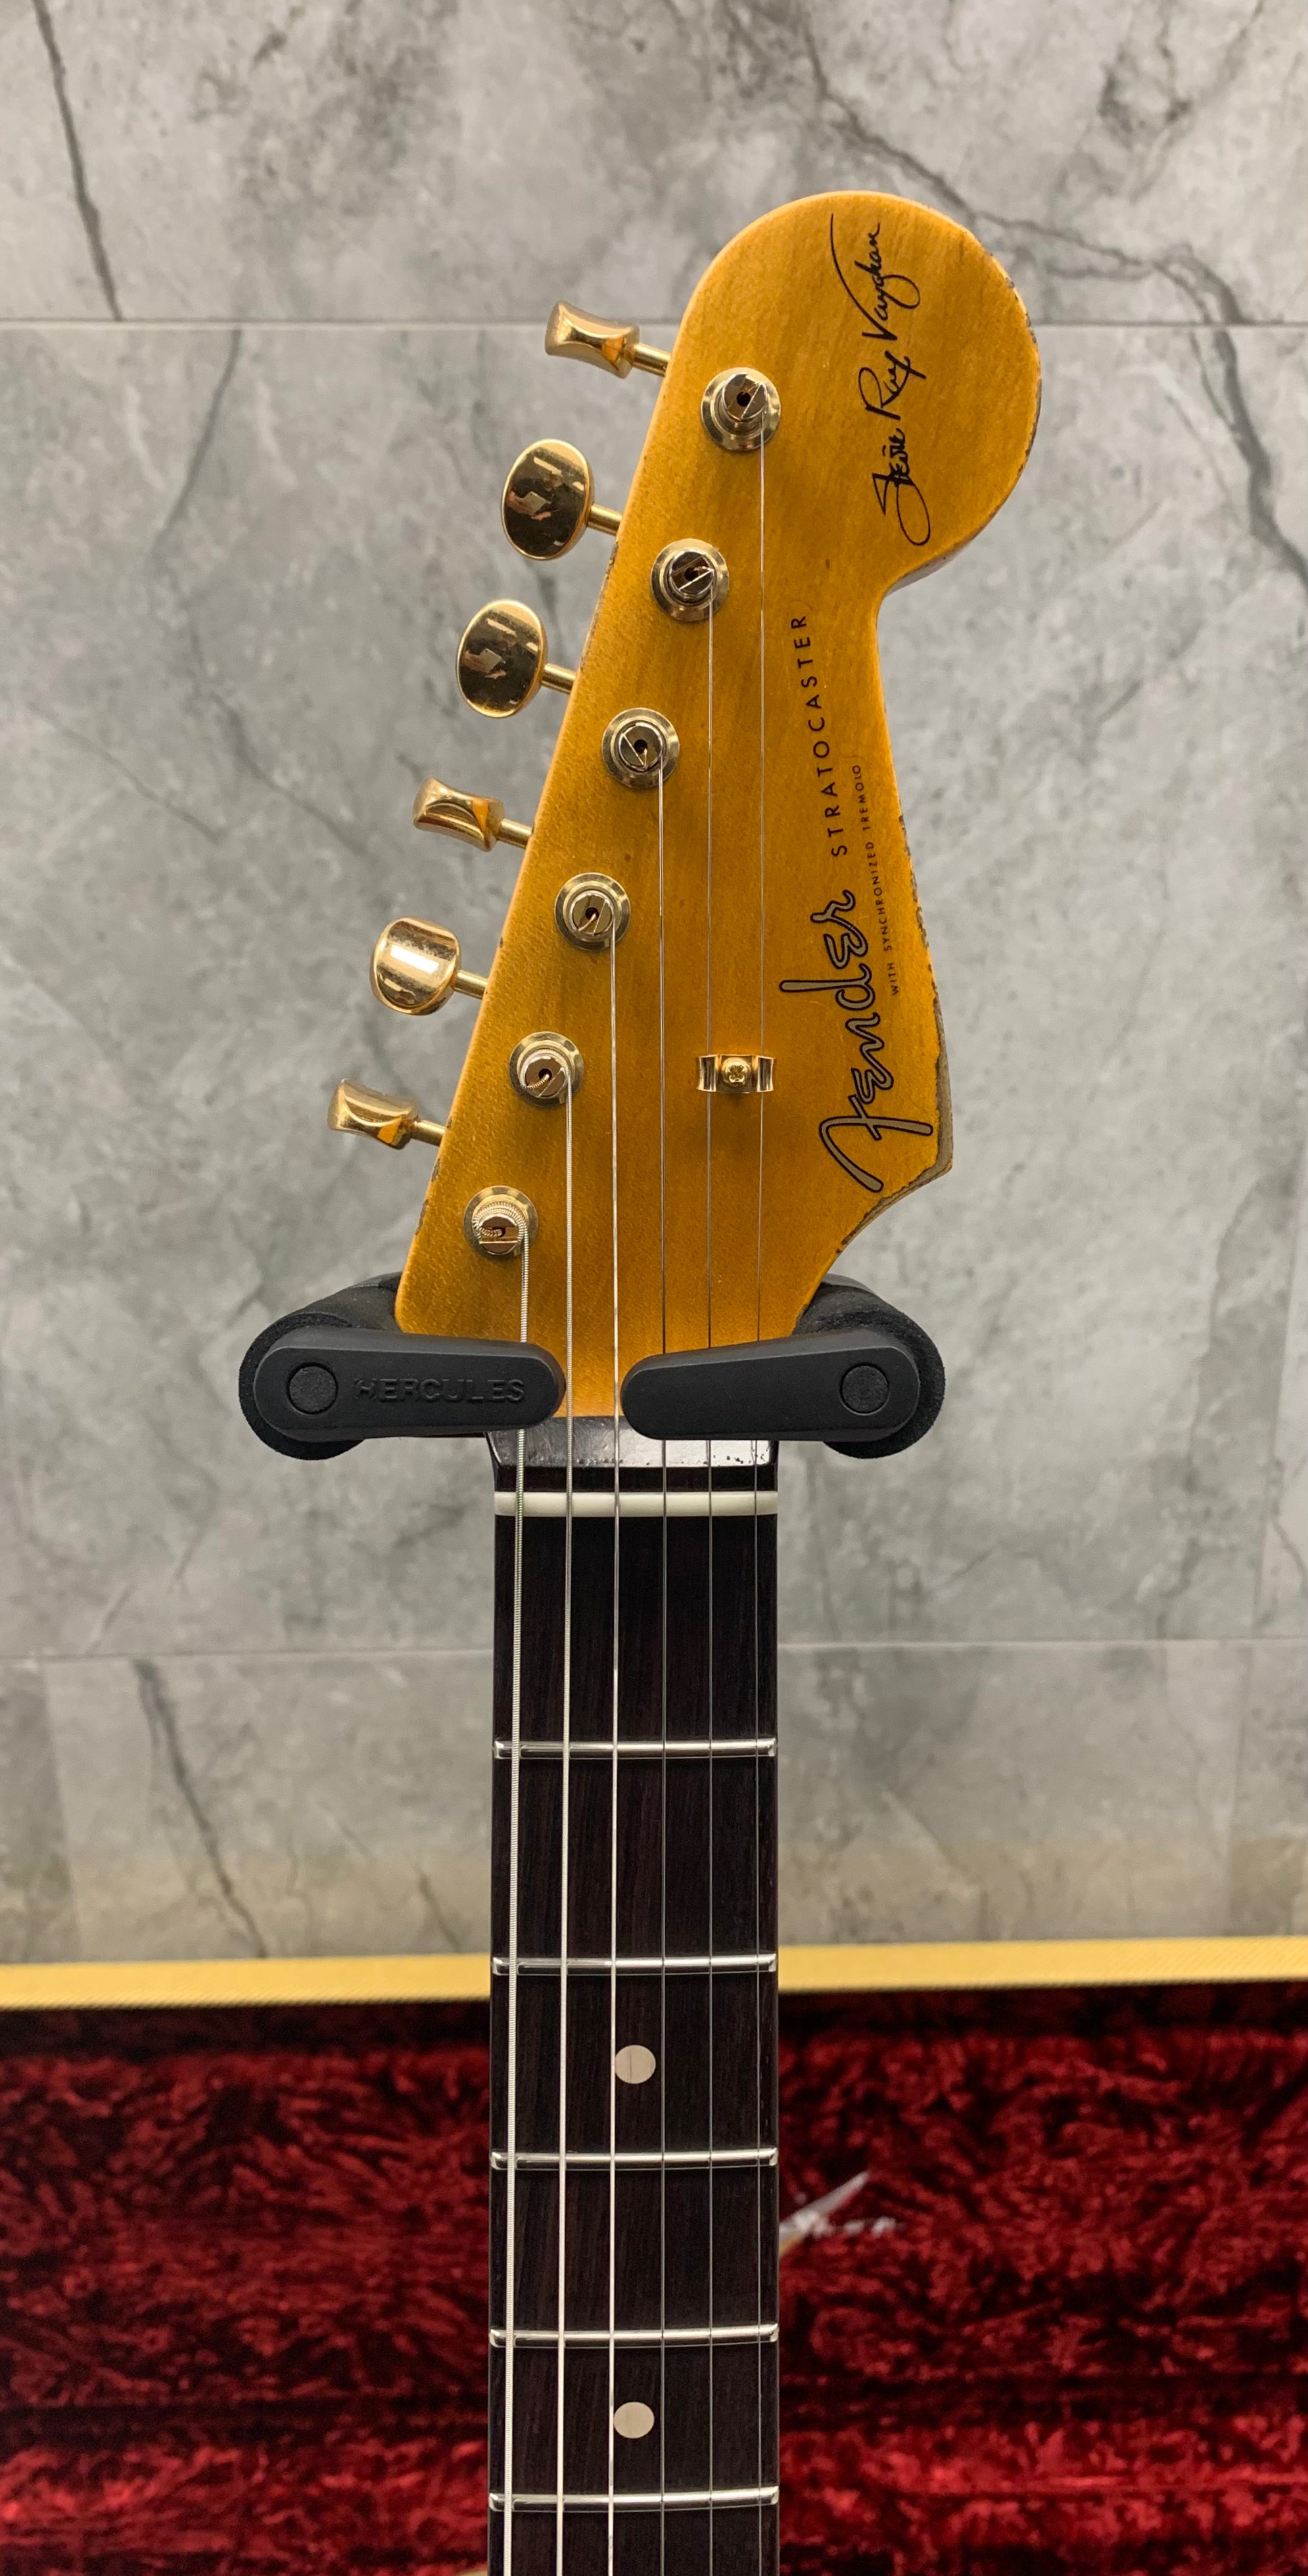 Fender Custom Shop SRV Stevie Ray Vaughan Signature Stratocaster Relic with Closet Classic Hardware, Rosewood Fingerboard, Faded 3-Color Sunburst 9235001087